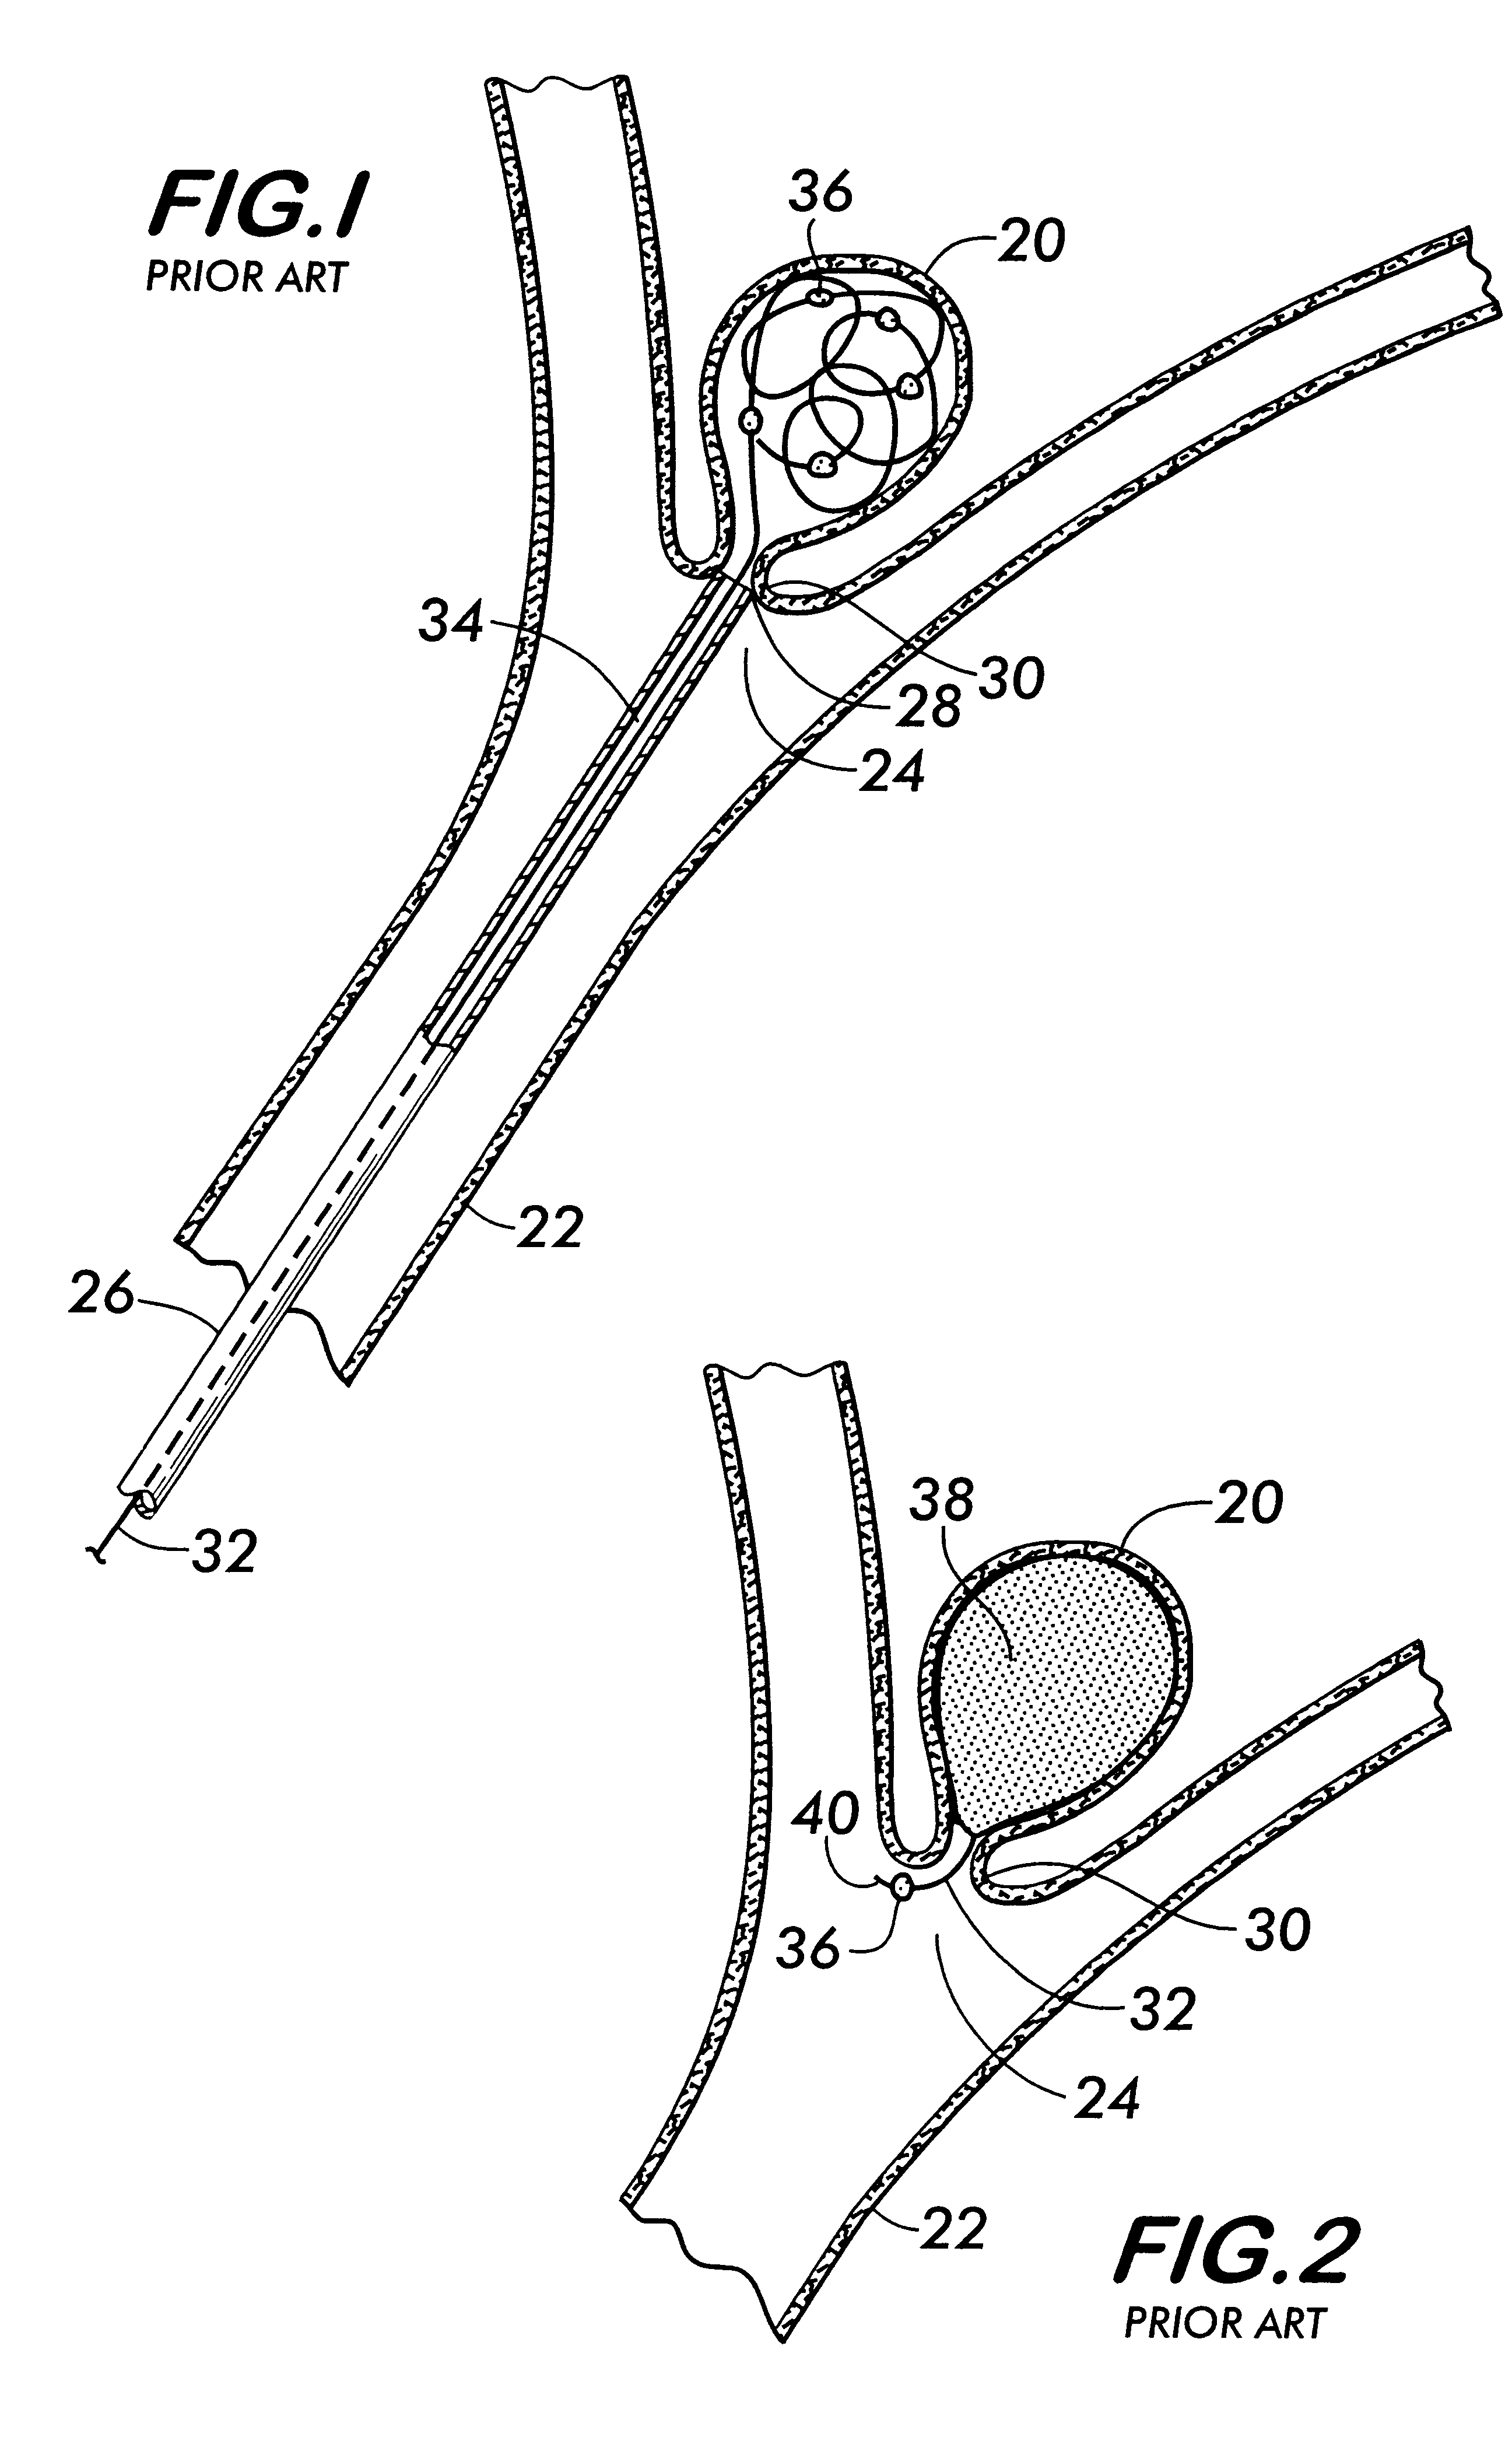 Bag for use in the intravascular treatment of saccular aneurysms